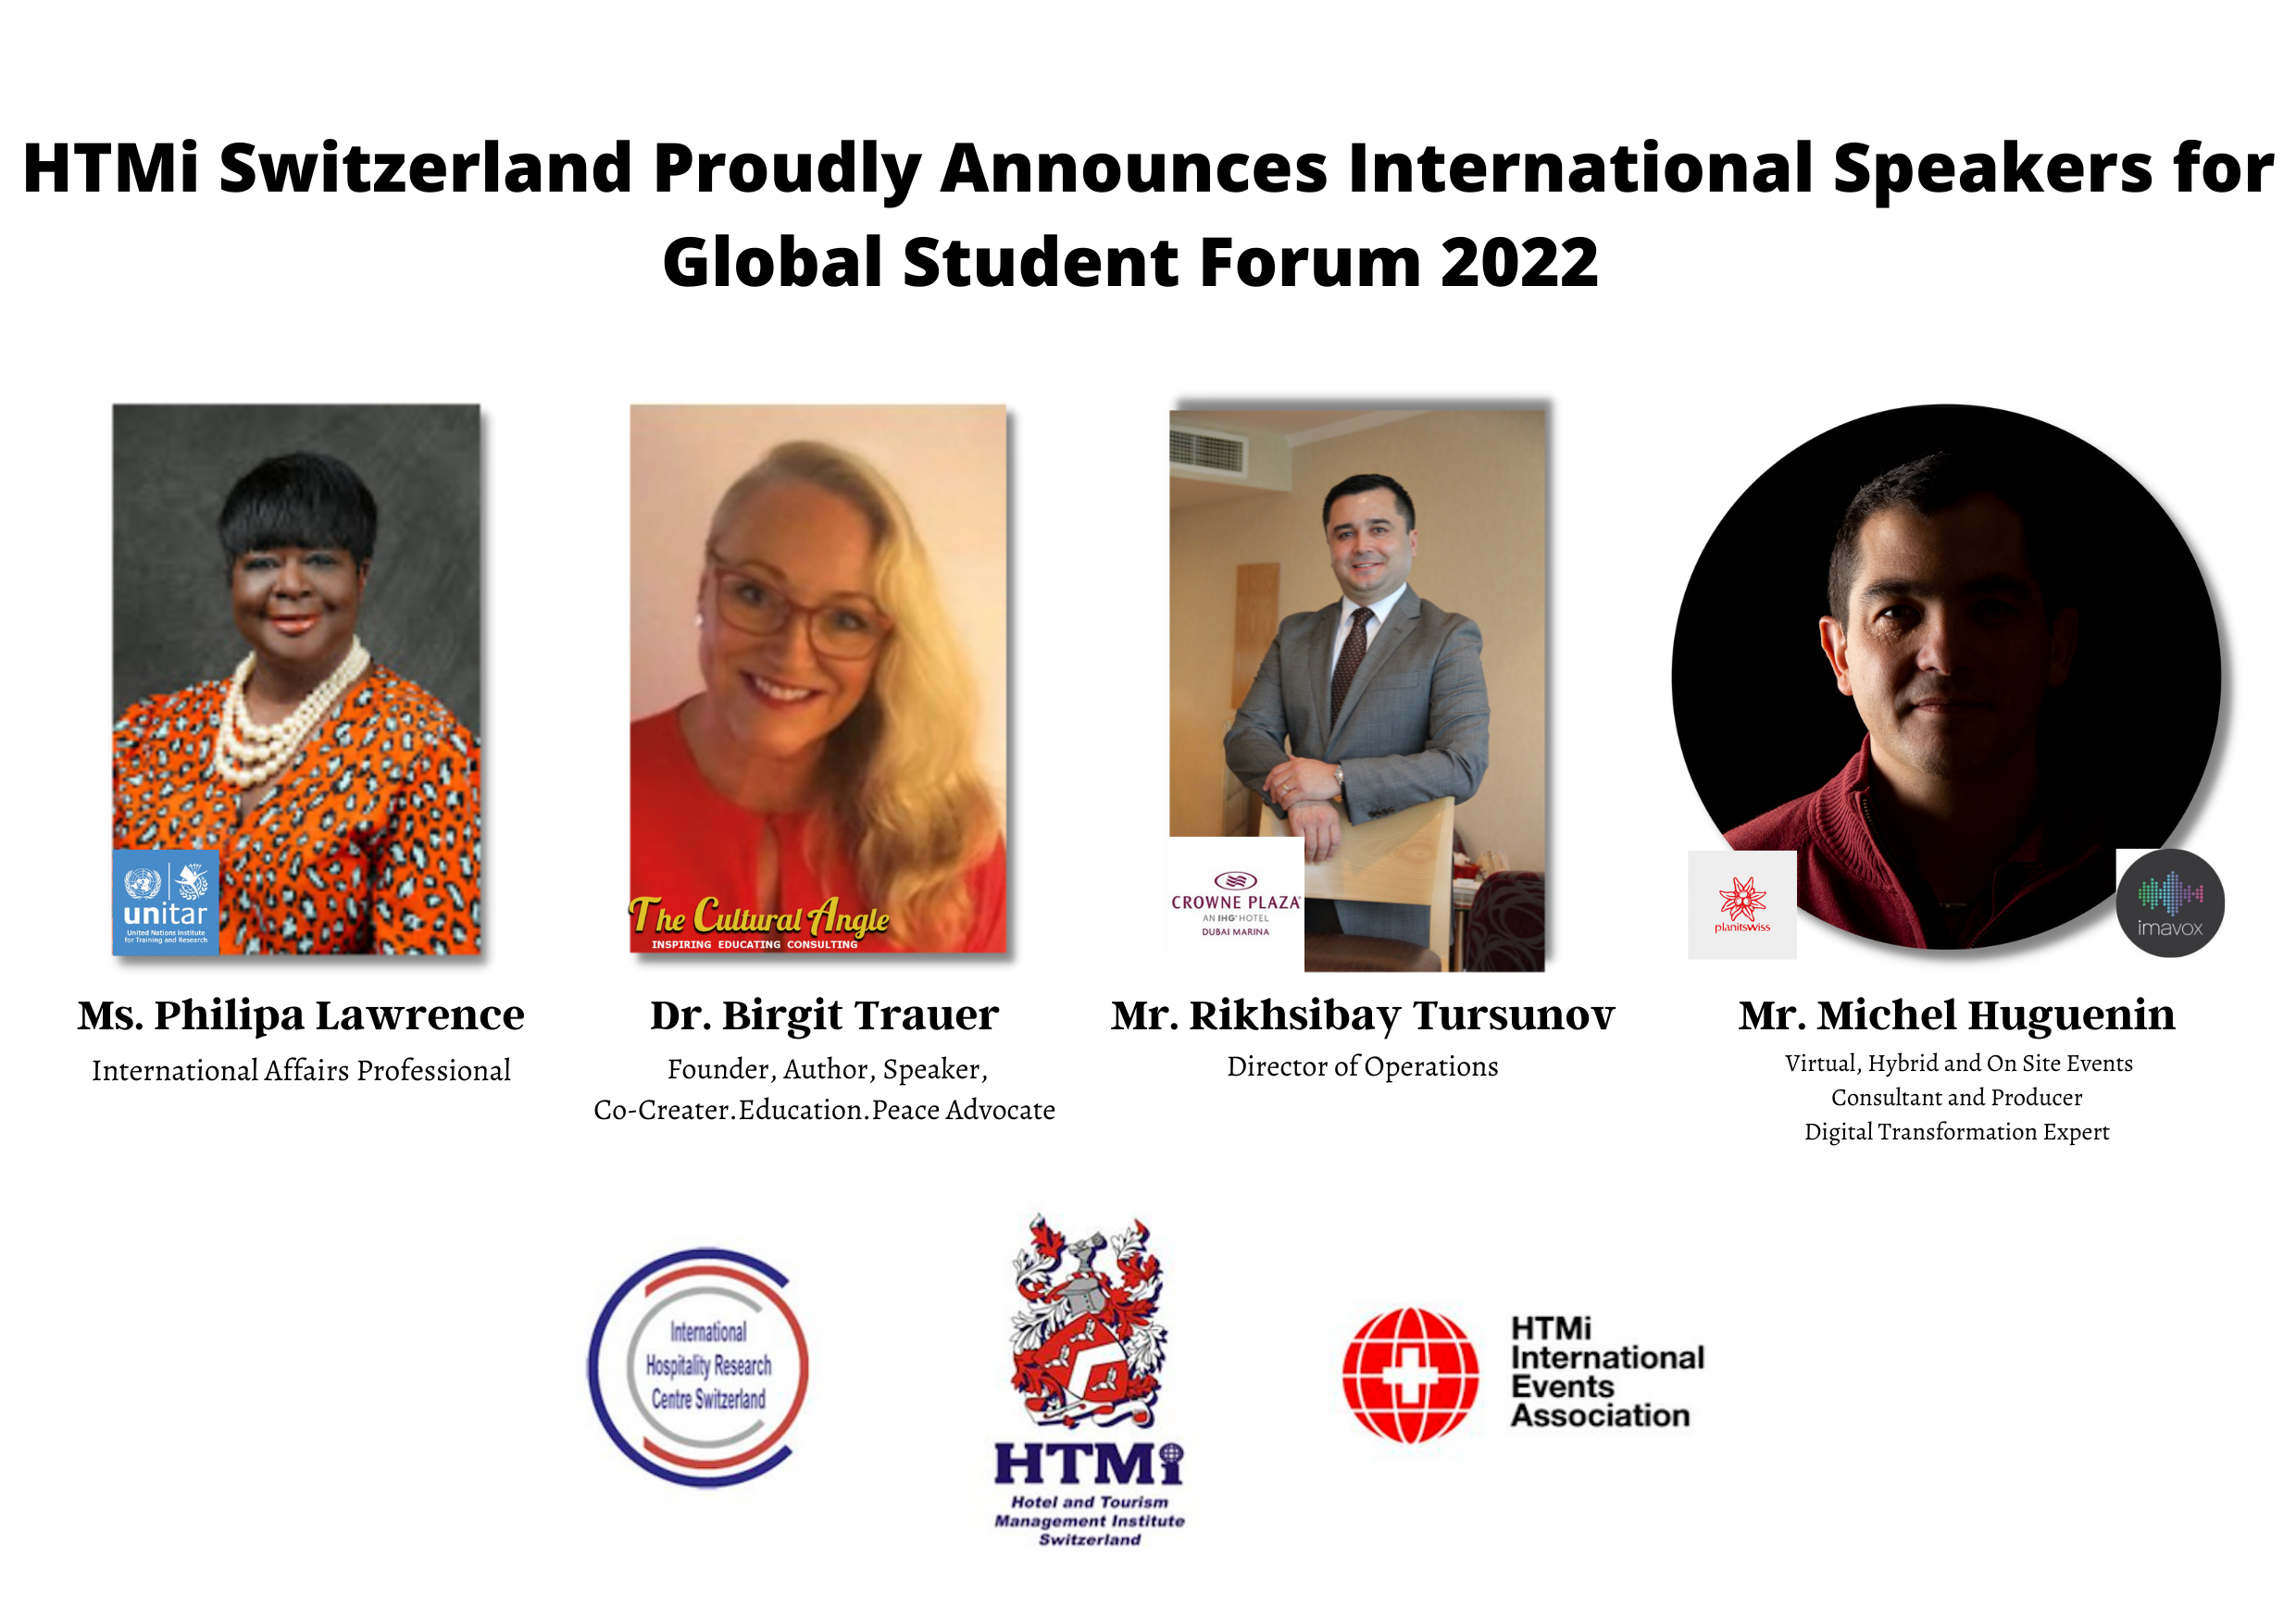 HTMi Switzerland proudly announces international speakers for the Global Student Forum 2022